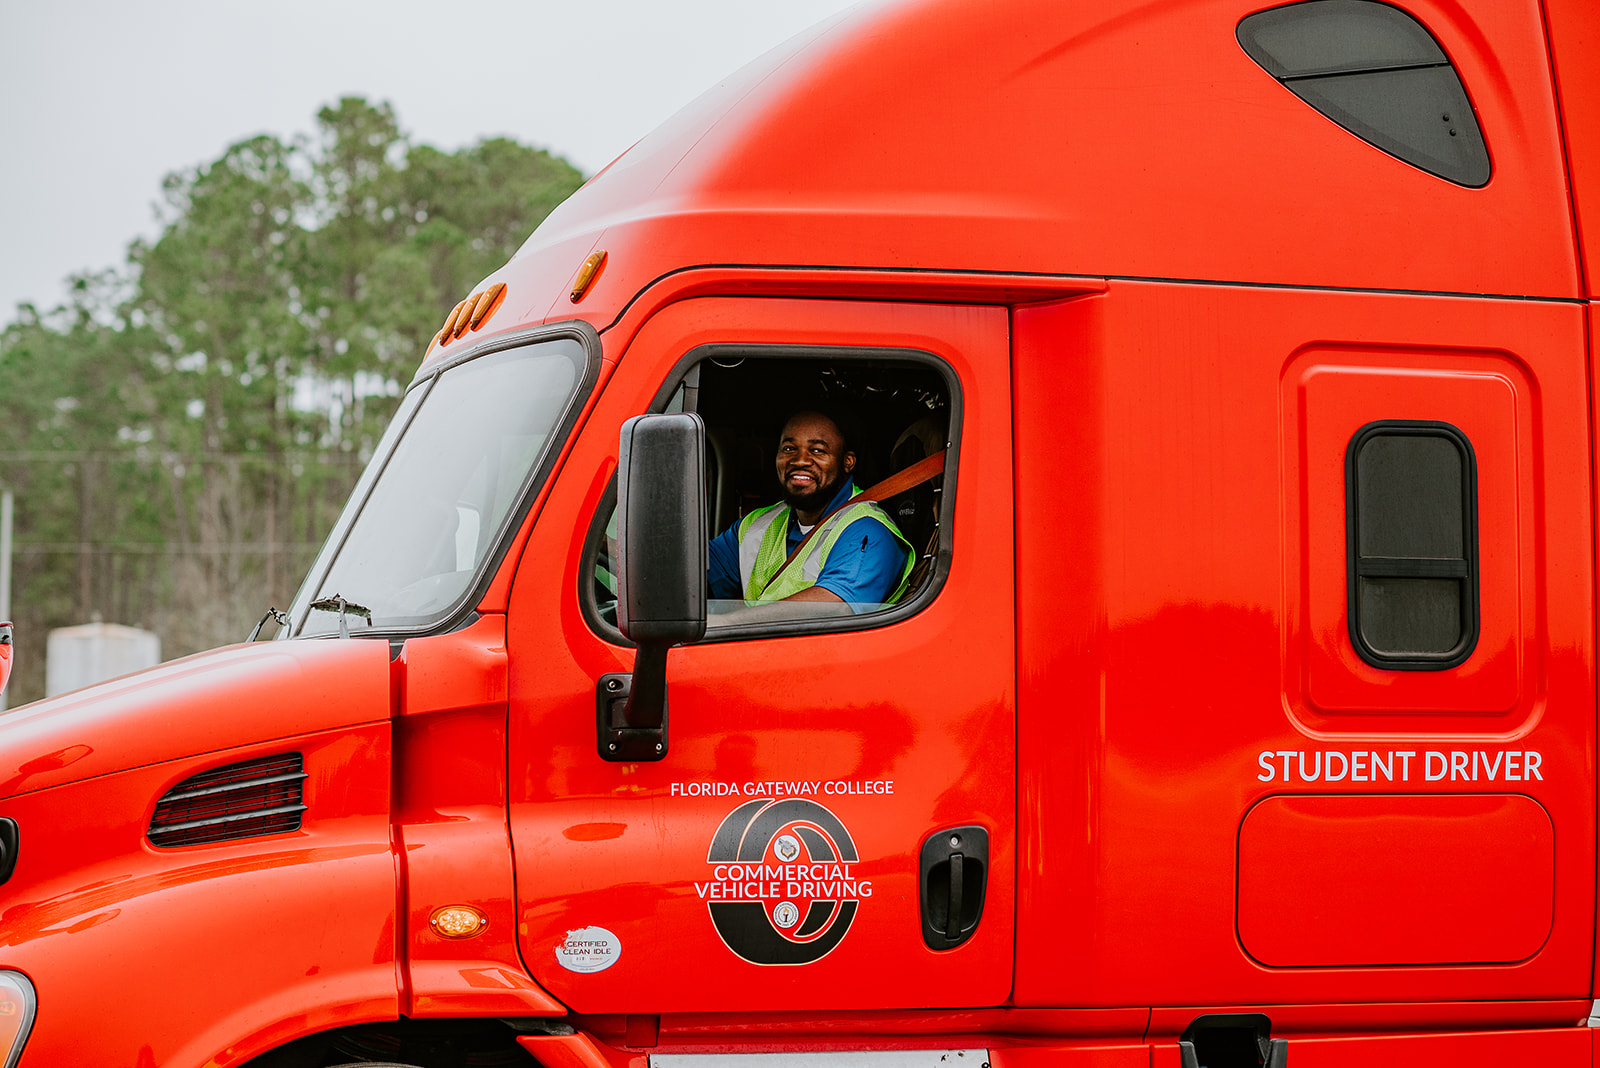 Florida Gateway College and North Florida College CDL Programs Offer Affordable Path to High-Demand Careers